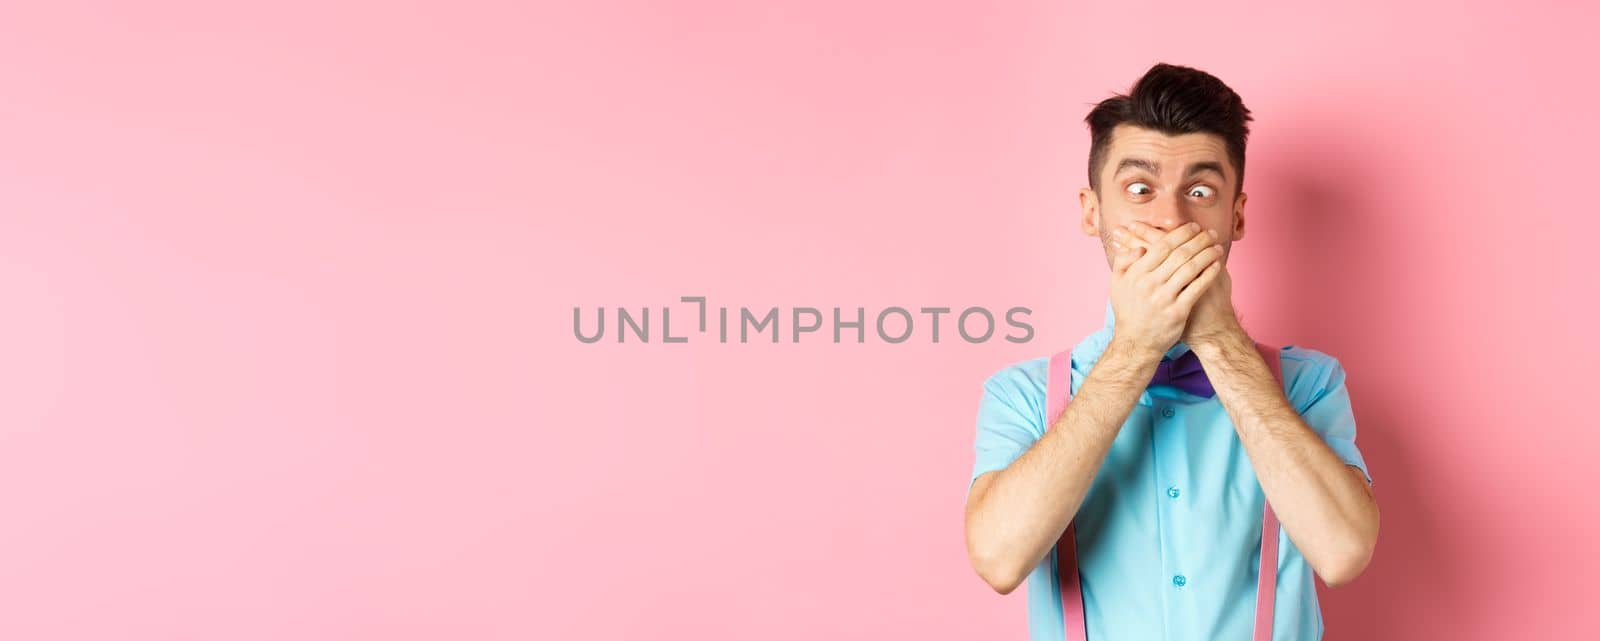 Funny young man covering mouth with hands and squint eyes, making clown grimaces, standing silly on pink background, entertain people.